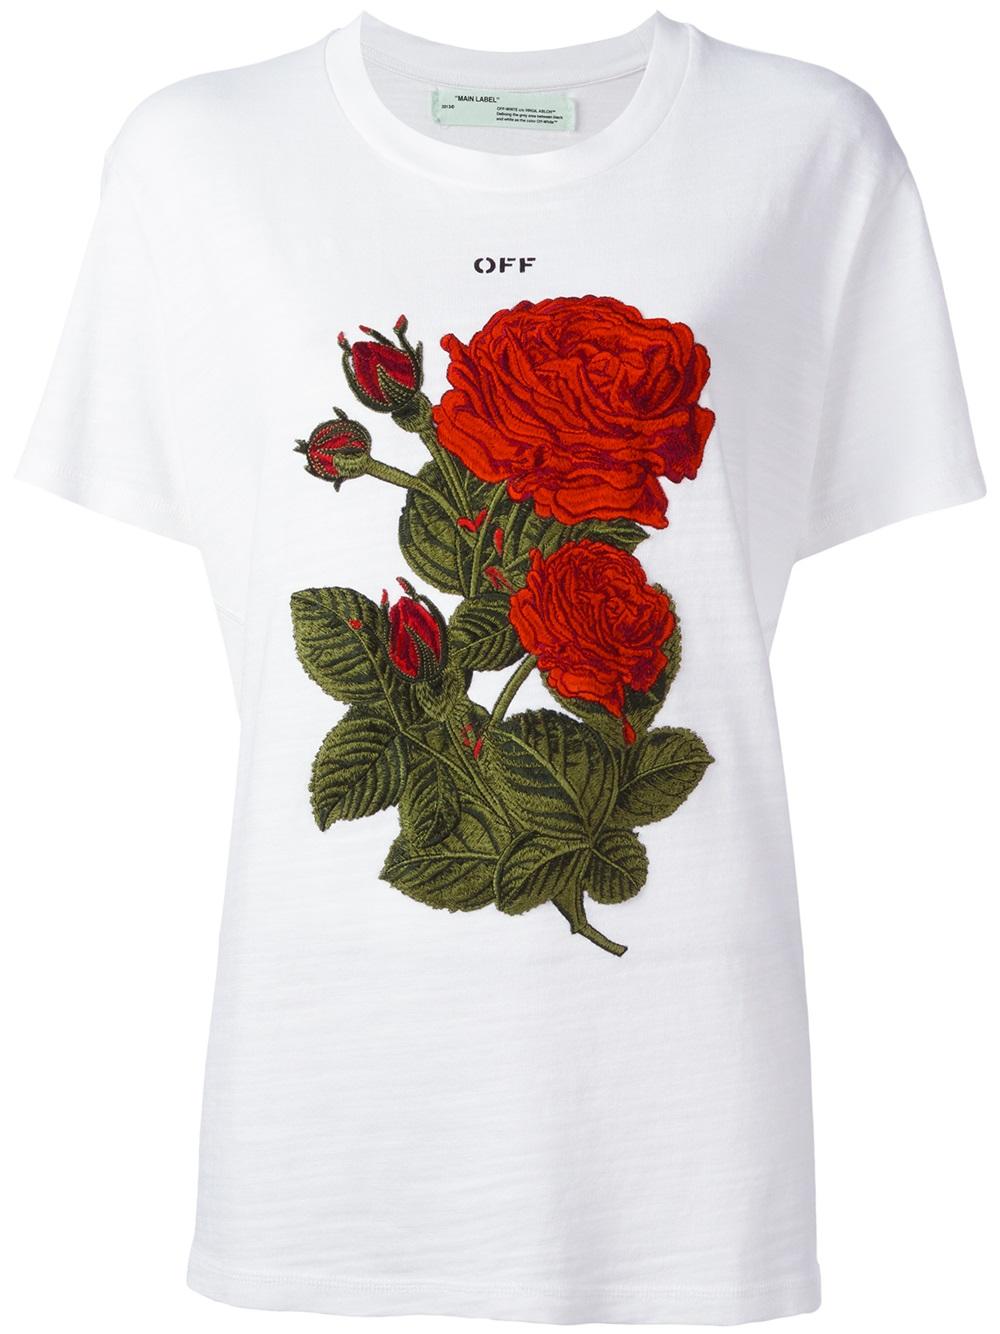 Off-White roses embroidery T-shirt 0188 WHITE Women Clothing T-shirts & Jerseys